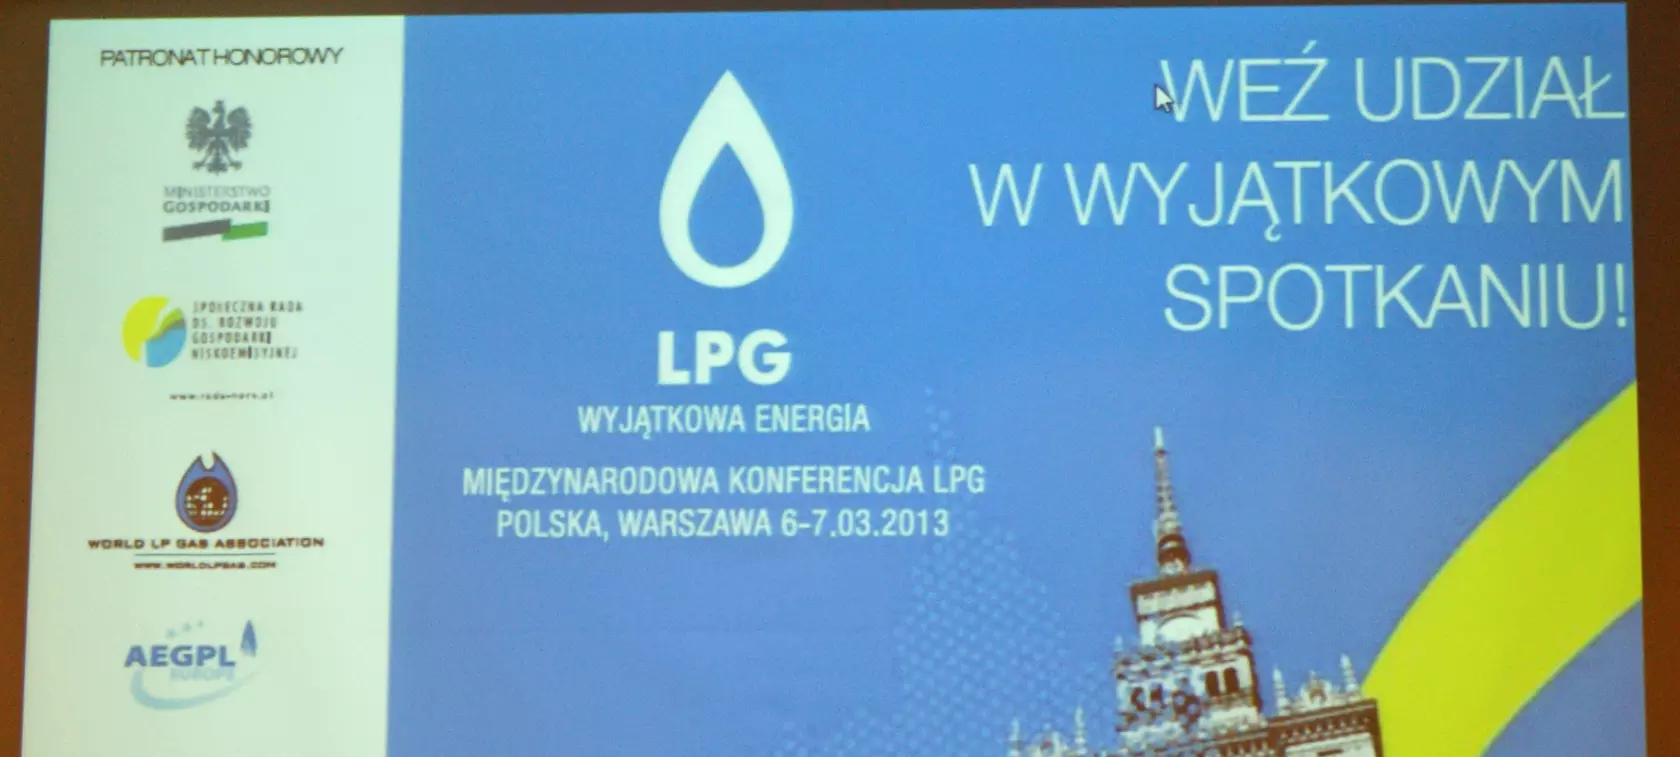 LPG - Exceptional Energy 2013: getting better